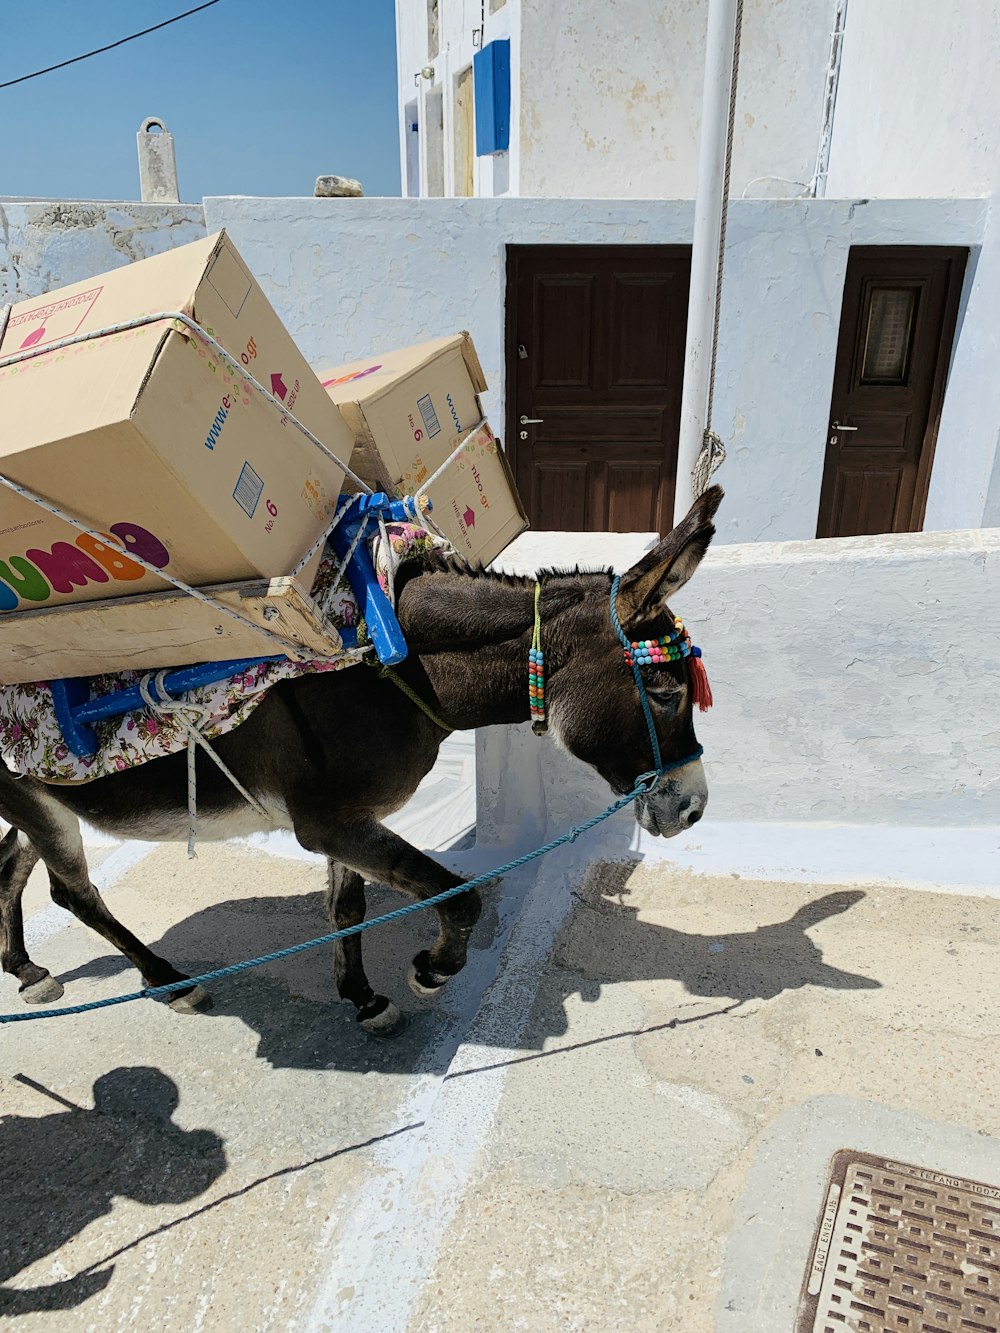 a donkey pulling a cart with boxes on its back